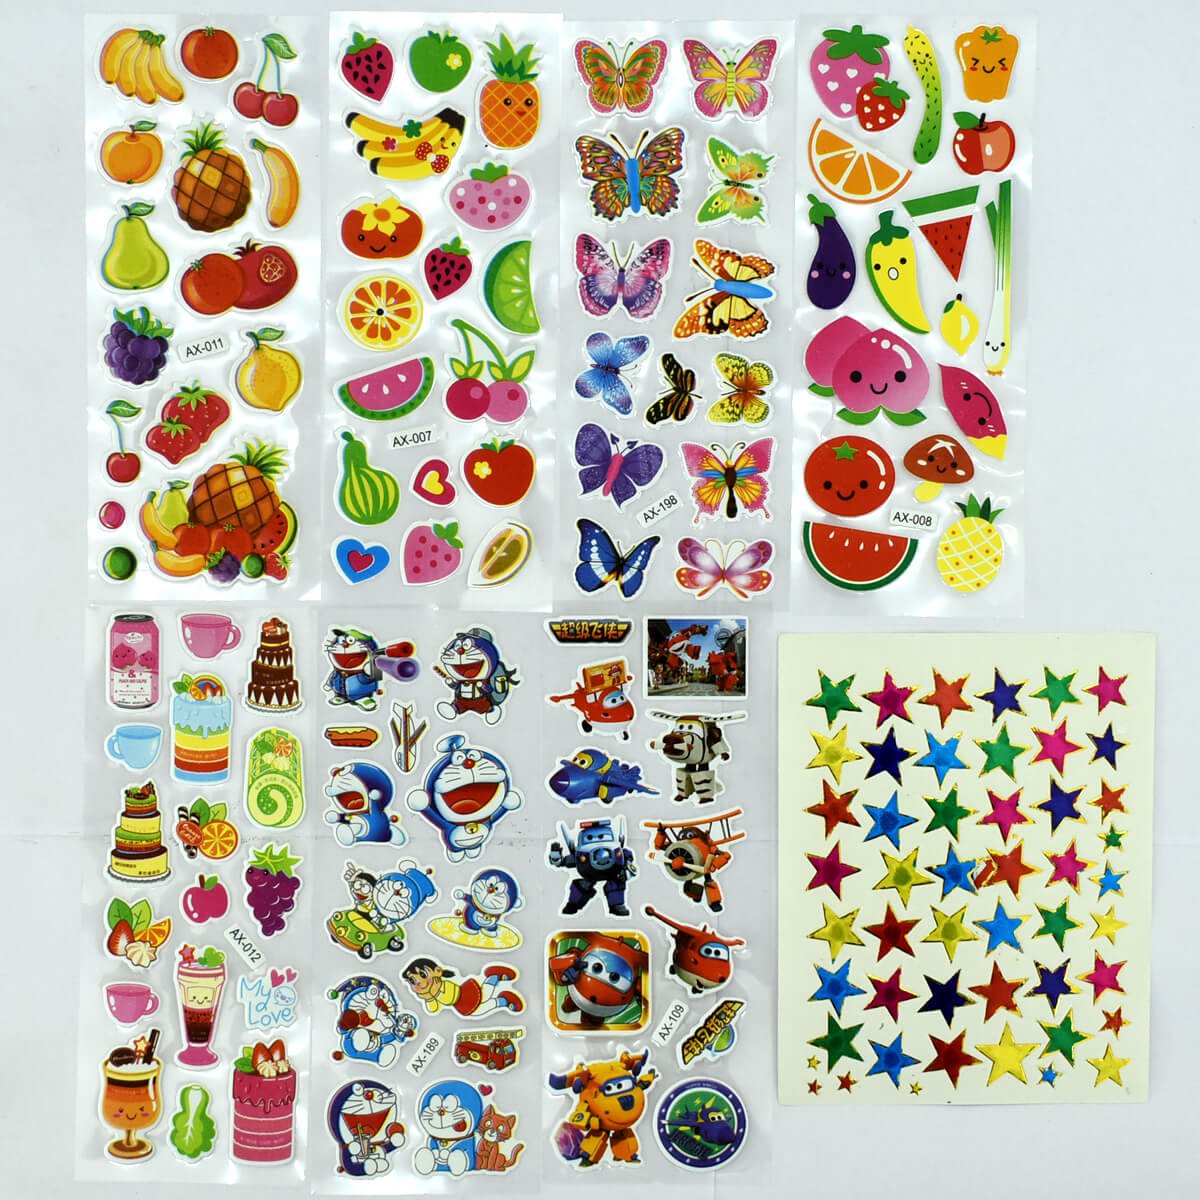 Stickers for student, projects, art & craft, decoration